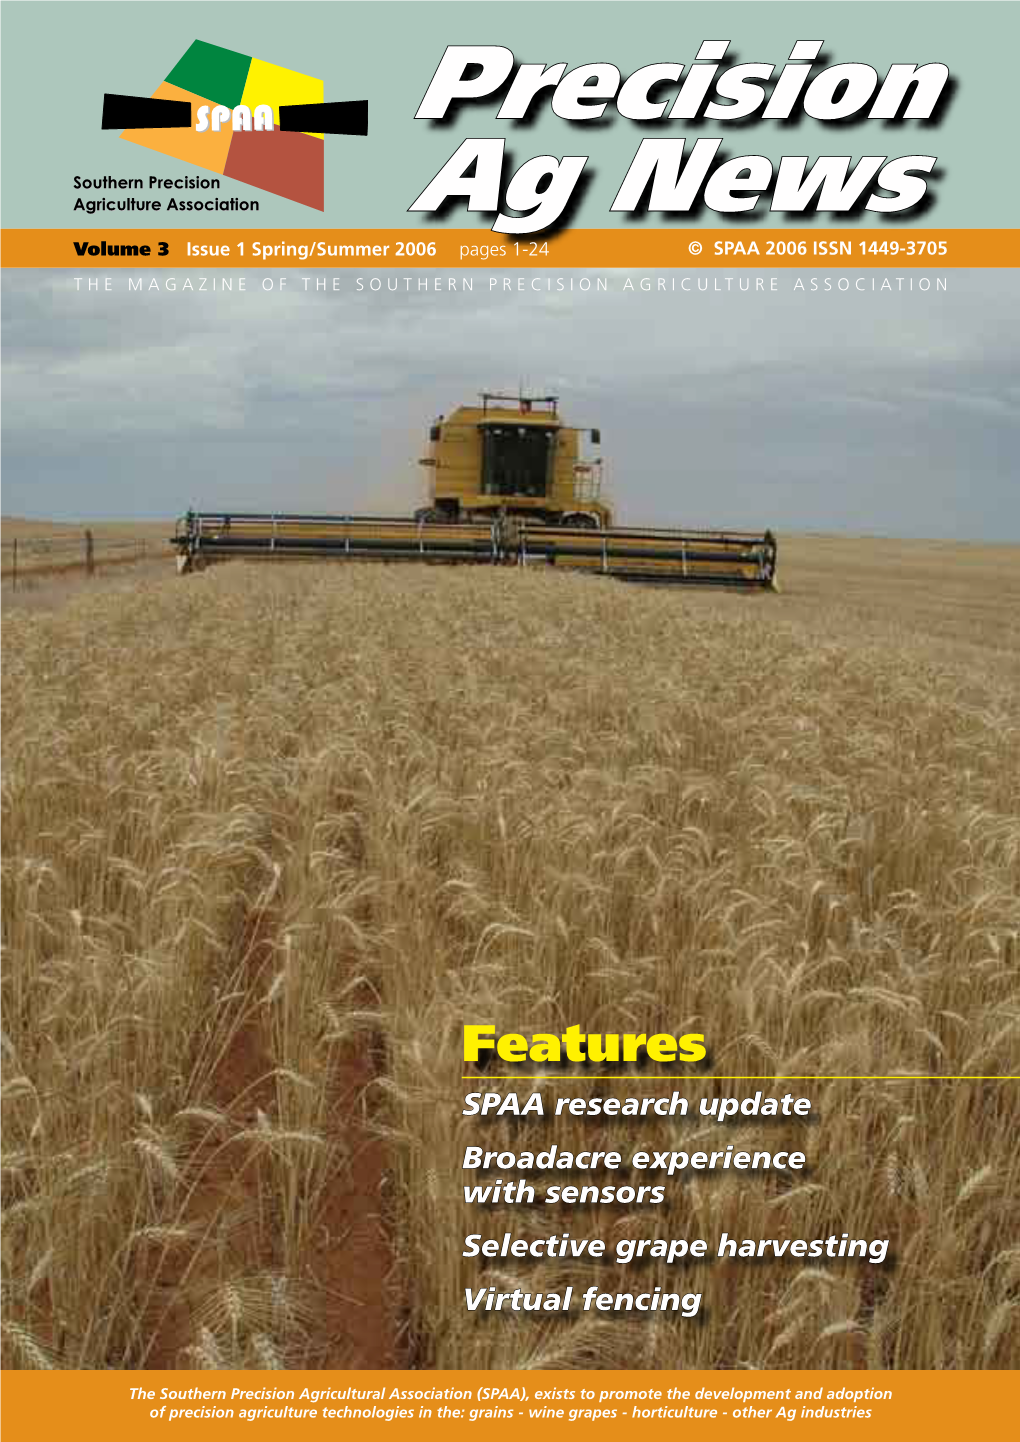 Precision Ag News Volume 3 Issue 1 Spring/Summer 2006 Pages 1-24 © SPAA 2006 ISSN 1449-3705